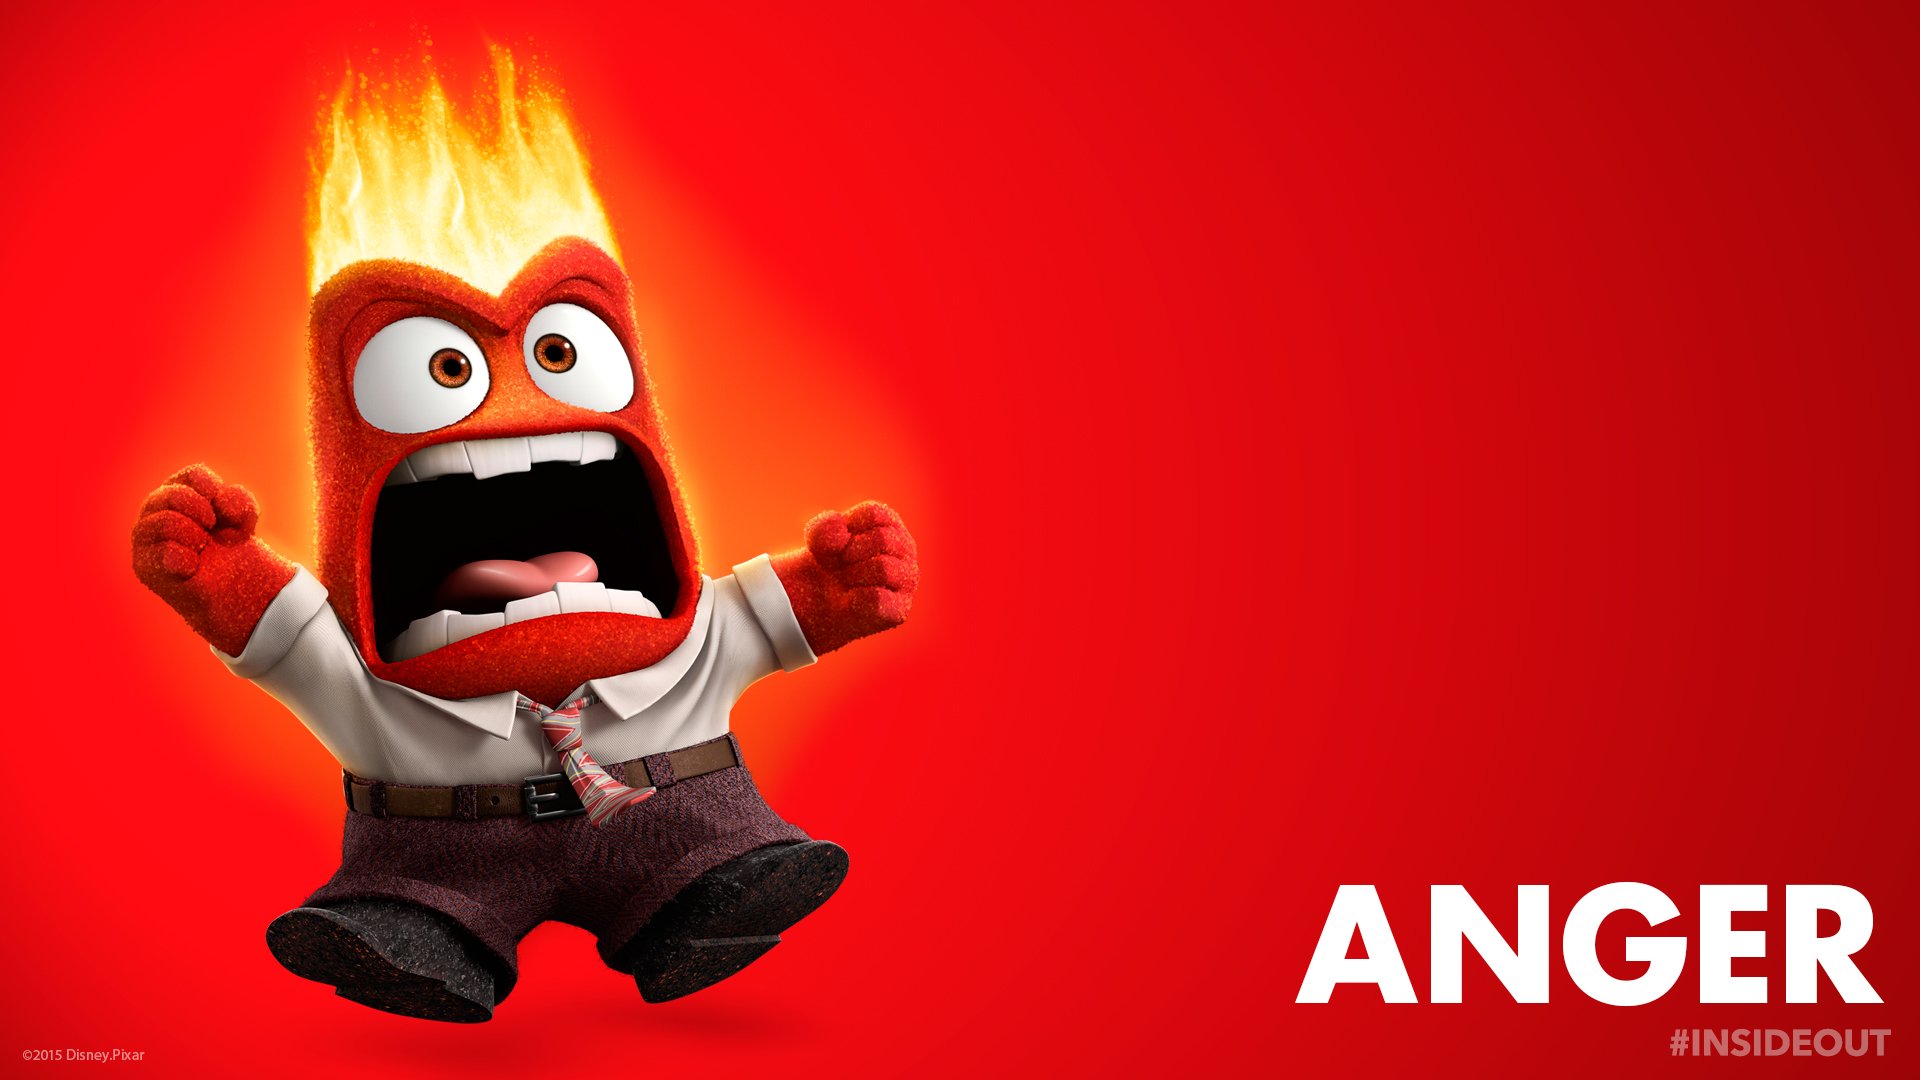 Inside Out Anger Wallpaper   Animated Movies Wallpaper 38596551 1920x1080